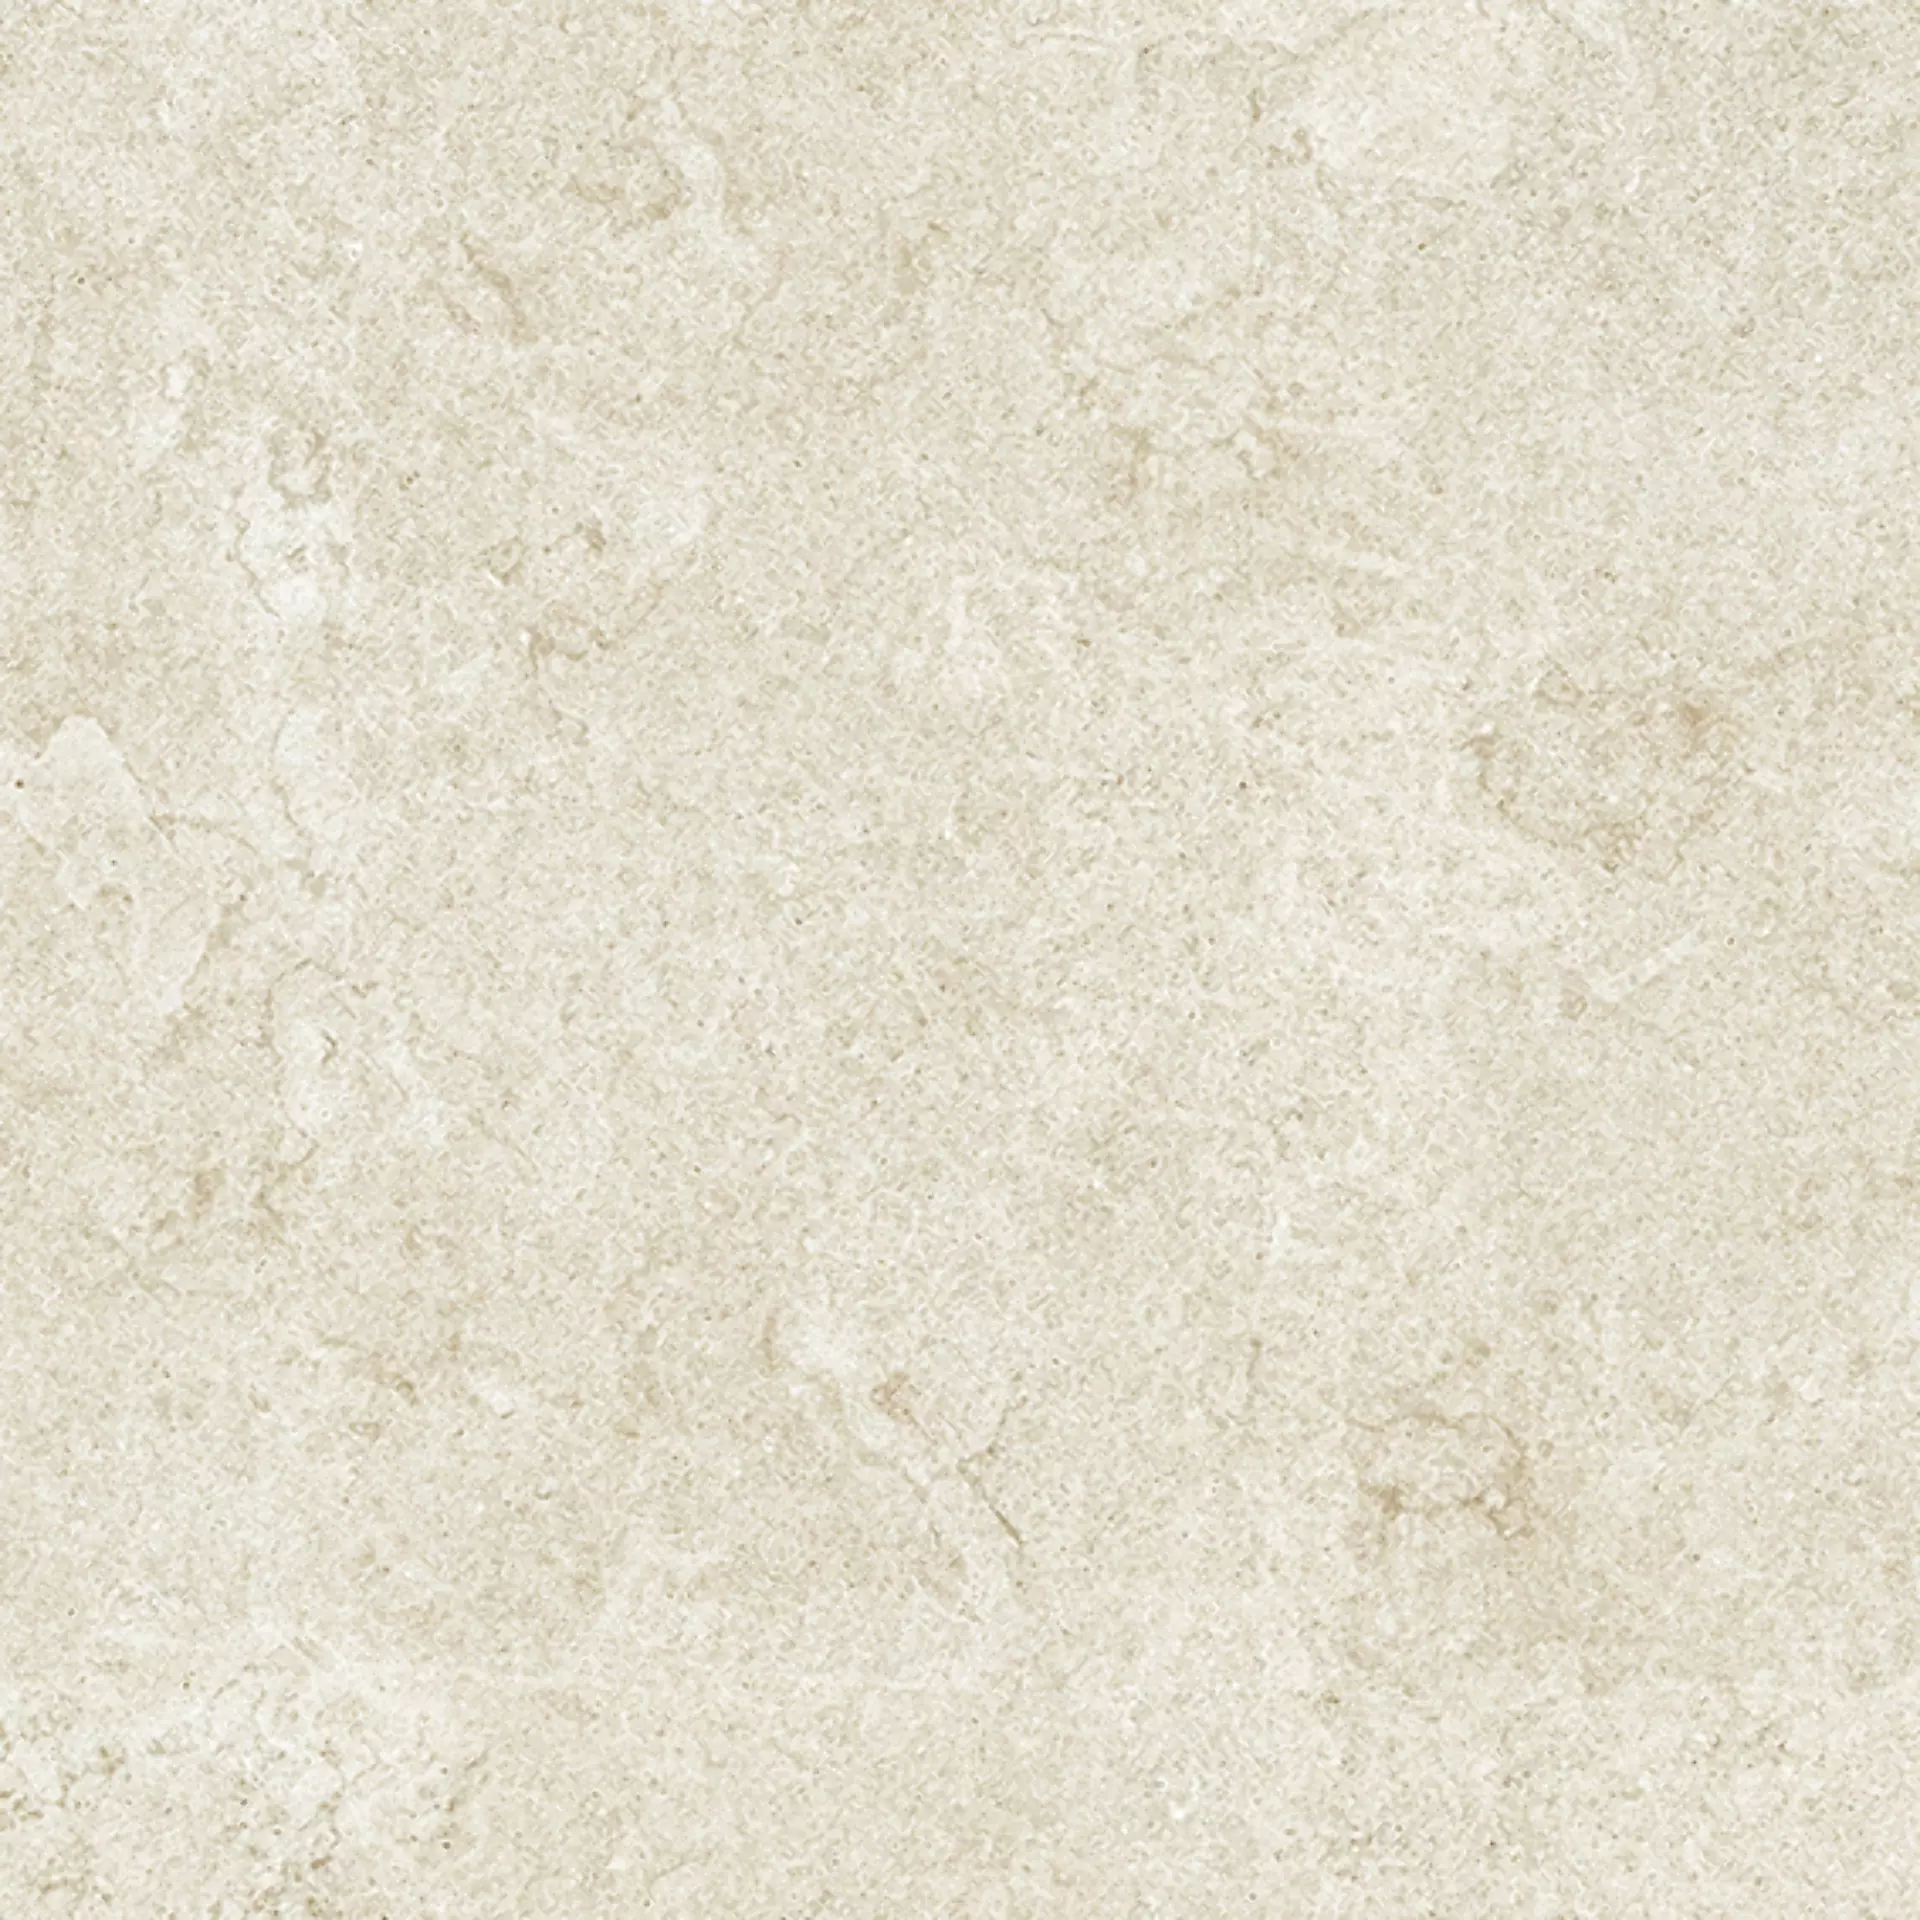 Margres Slabstone White Natural Antibacterial B251010LSL1PBF 100x100cm rectified 3,5mm